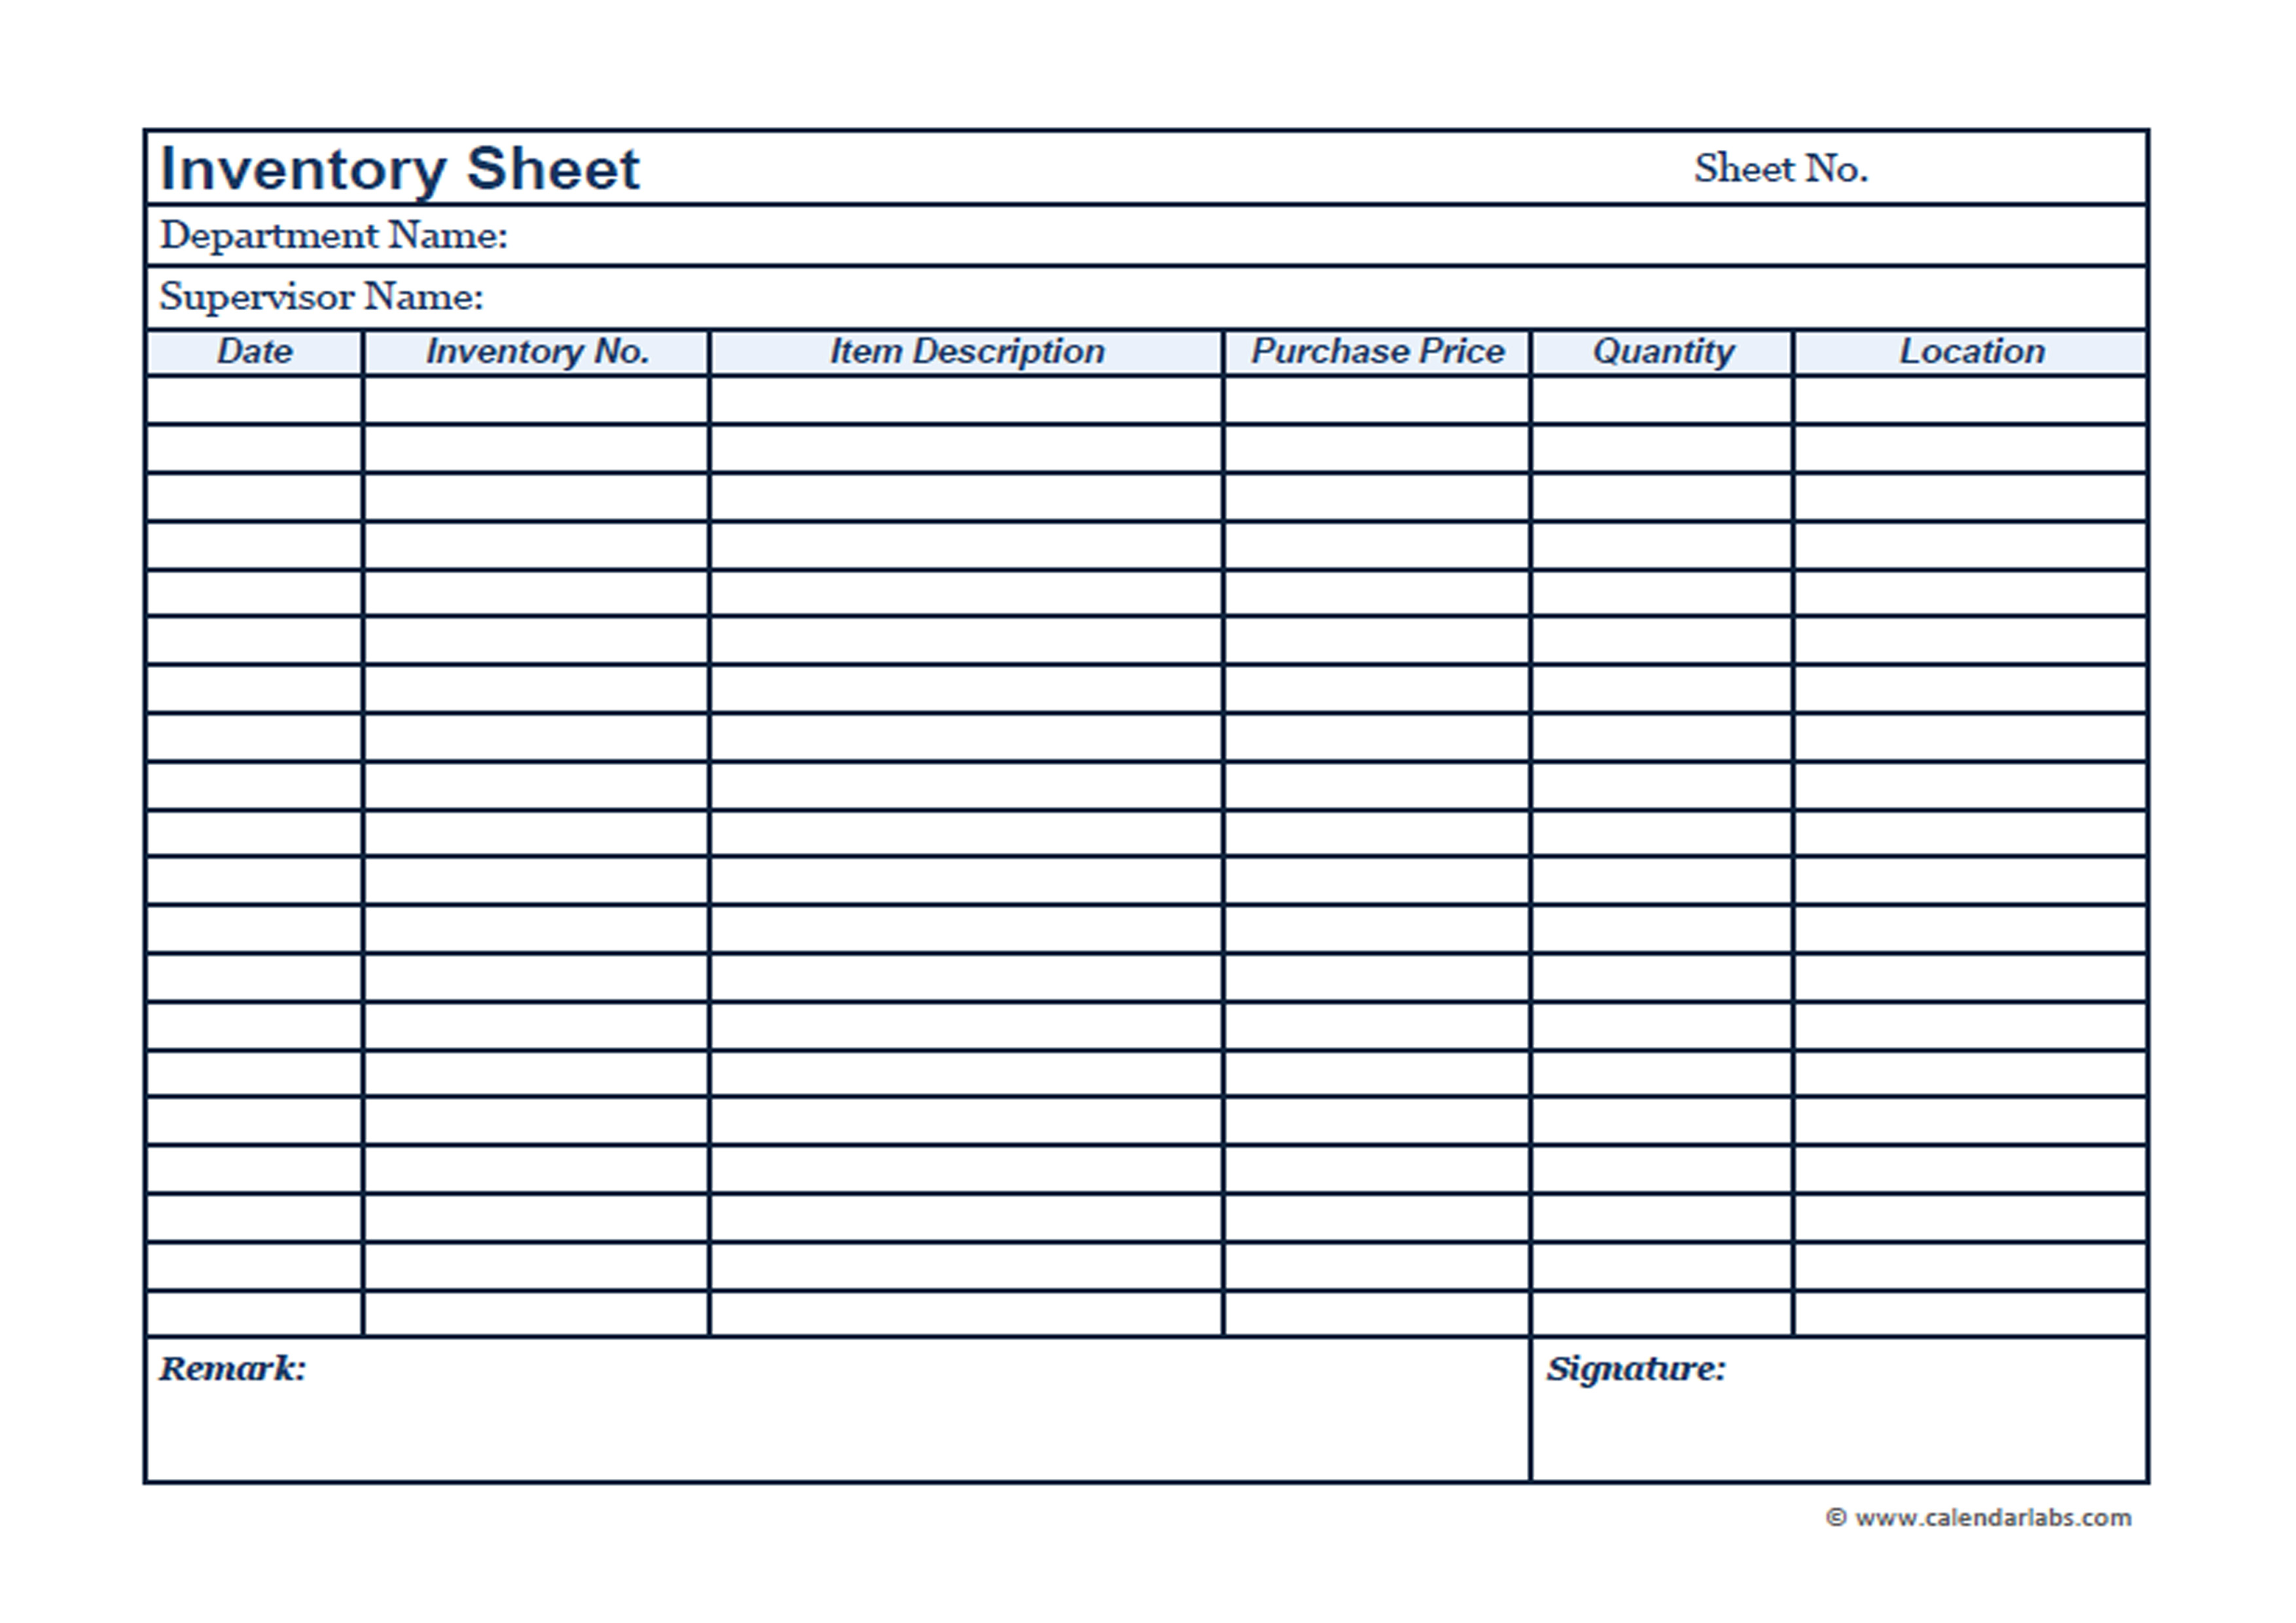 free download inventory list template for microsoft word